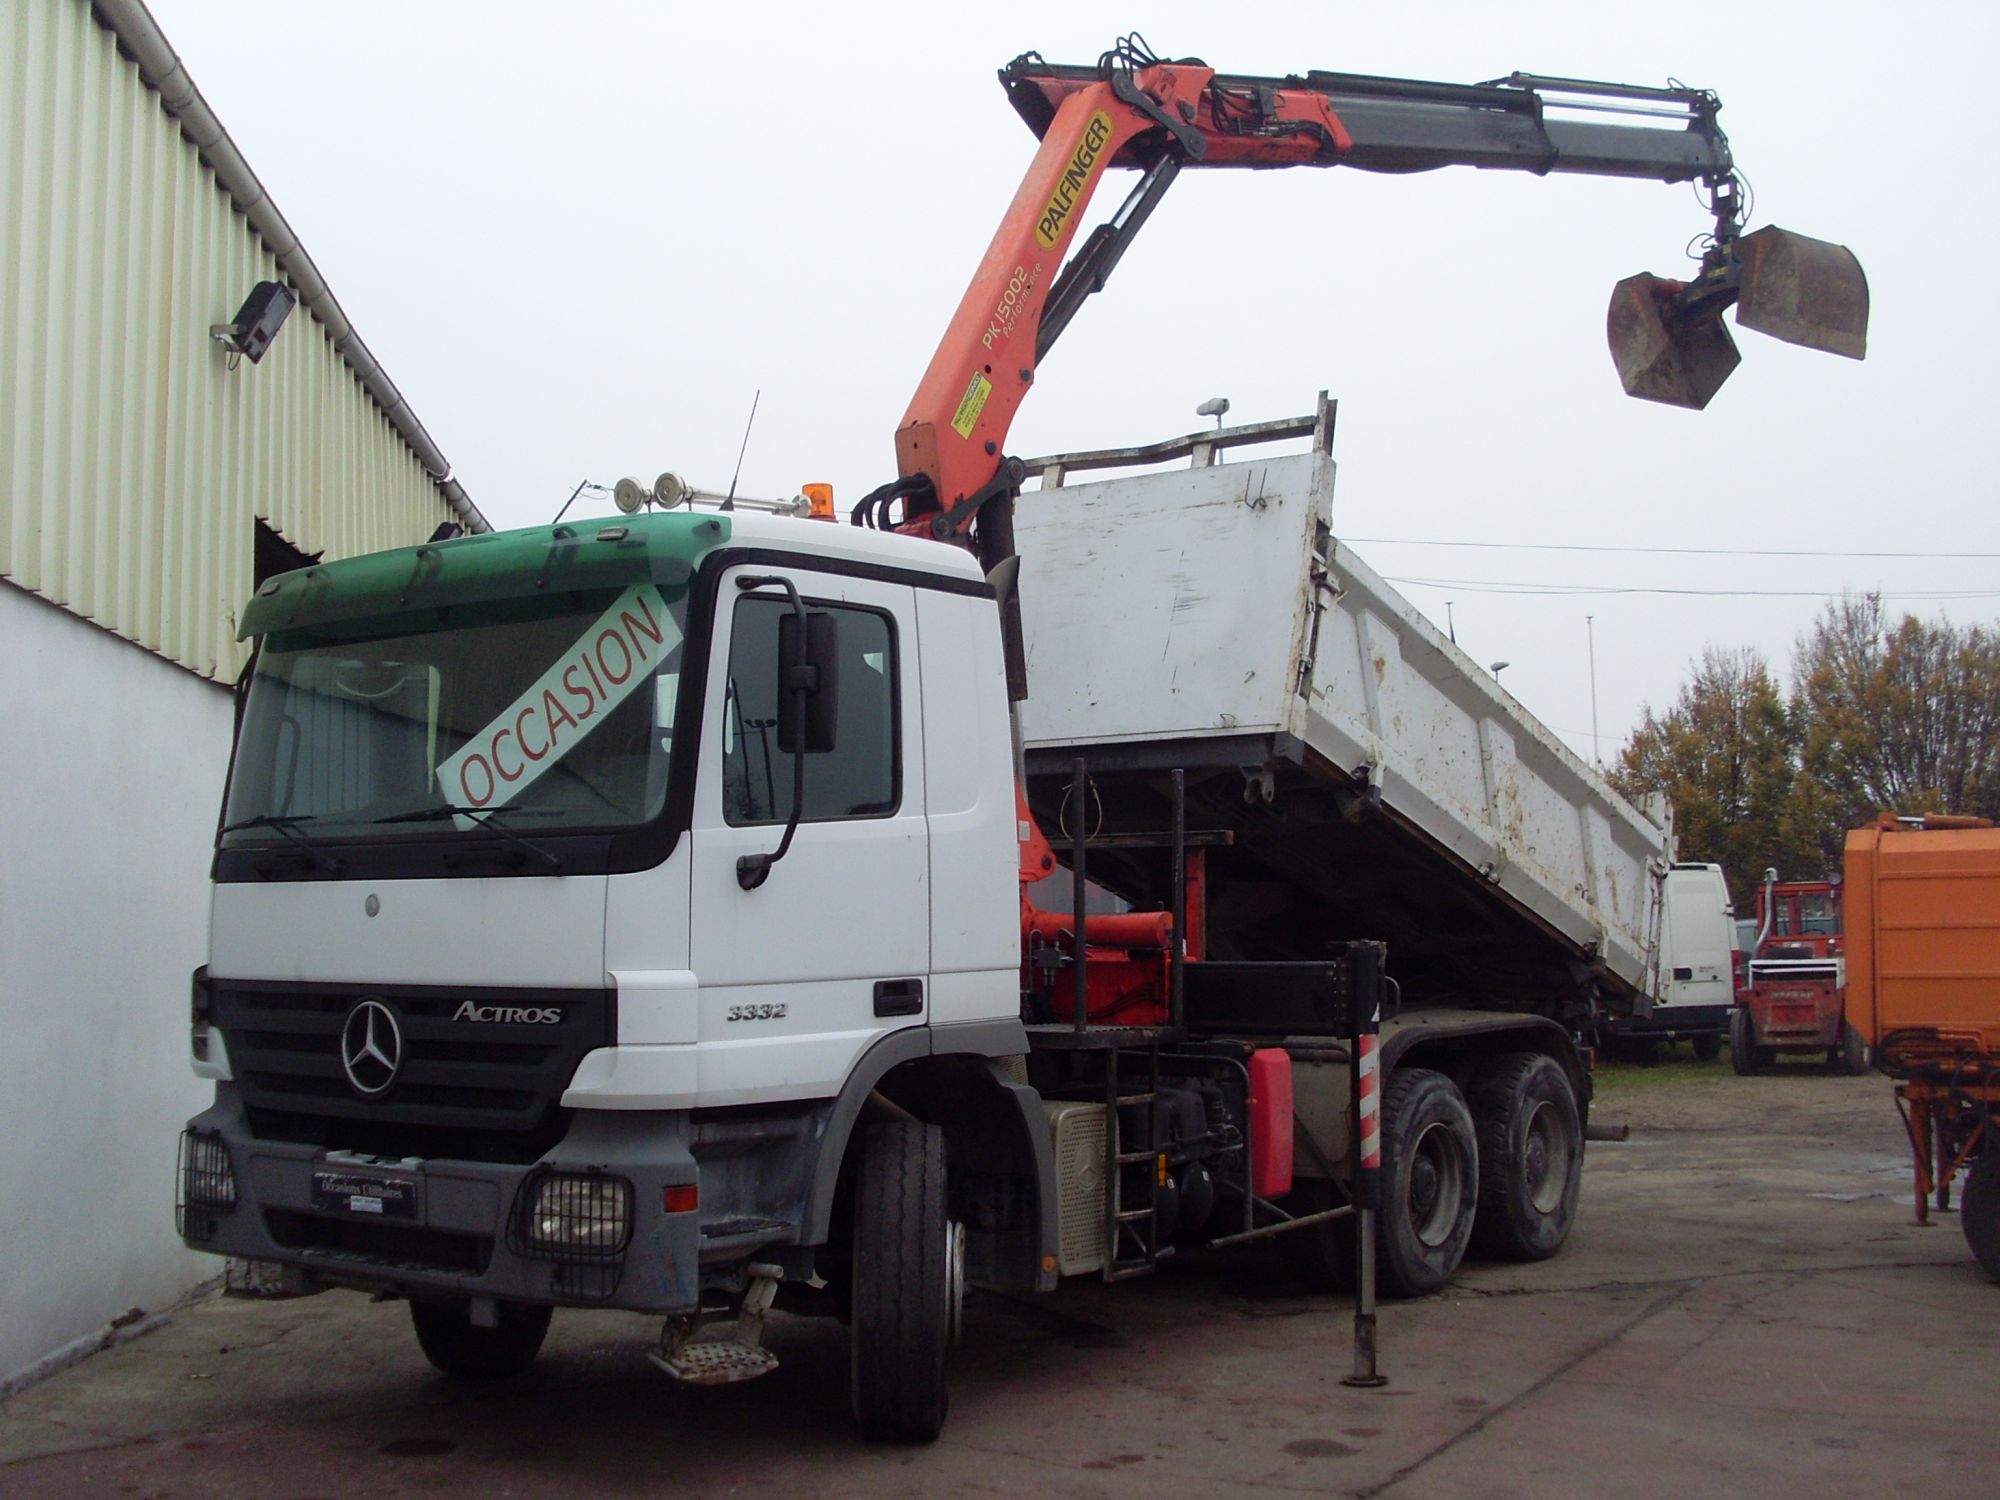 Actros 3332 kn 6x4 26 t